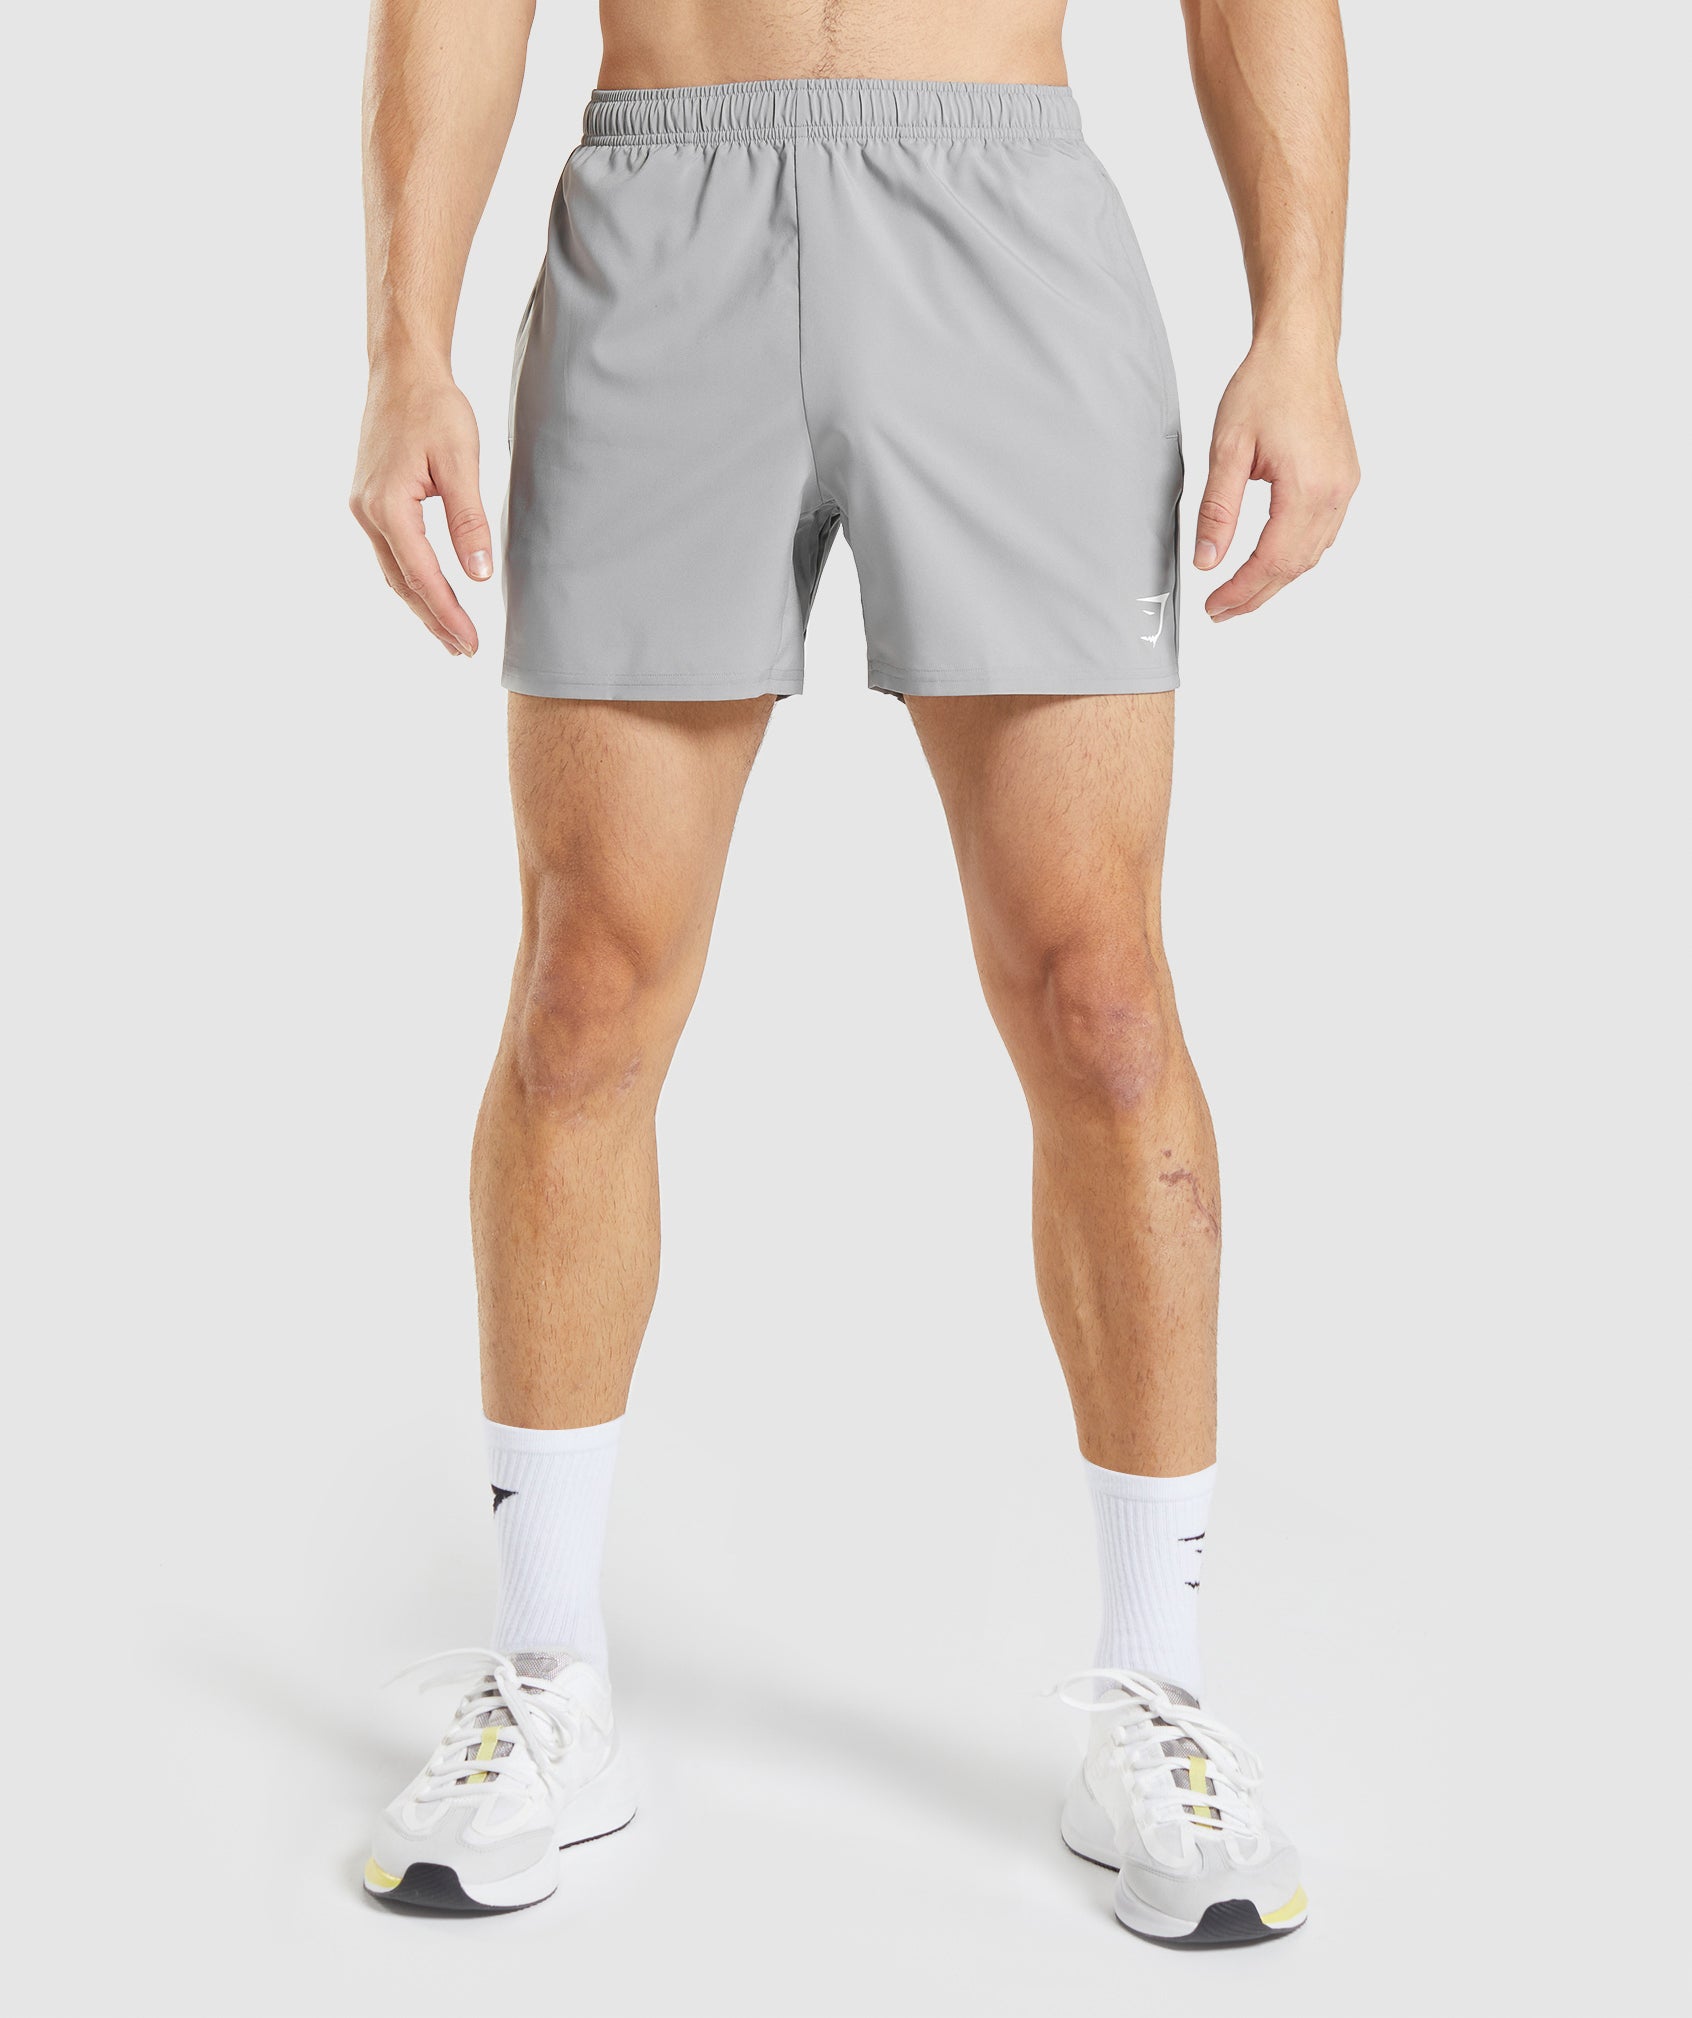 Arrival 5" Shorts in Smokey Grey - view 1